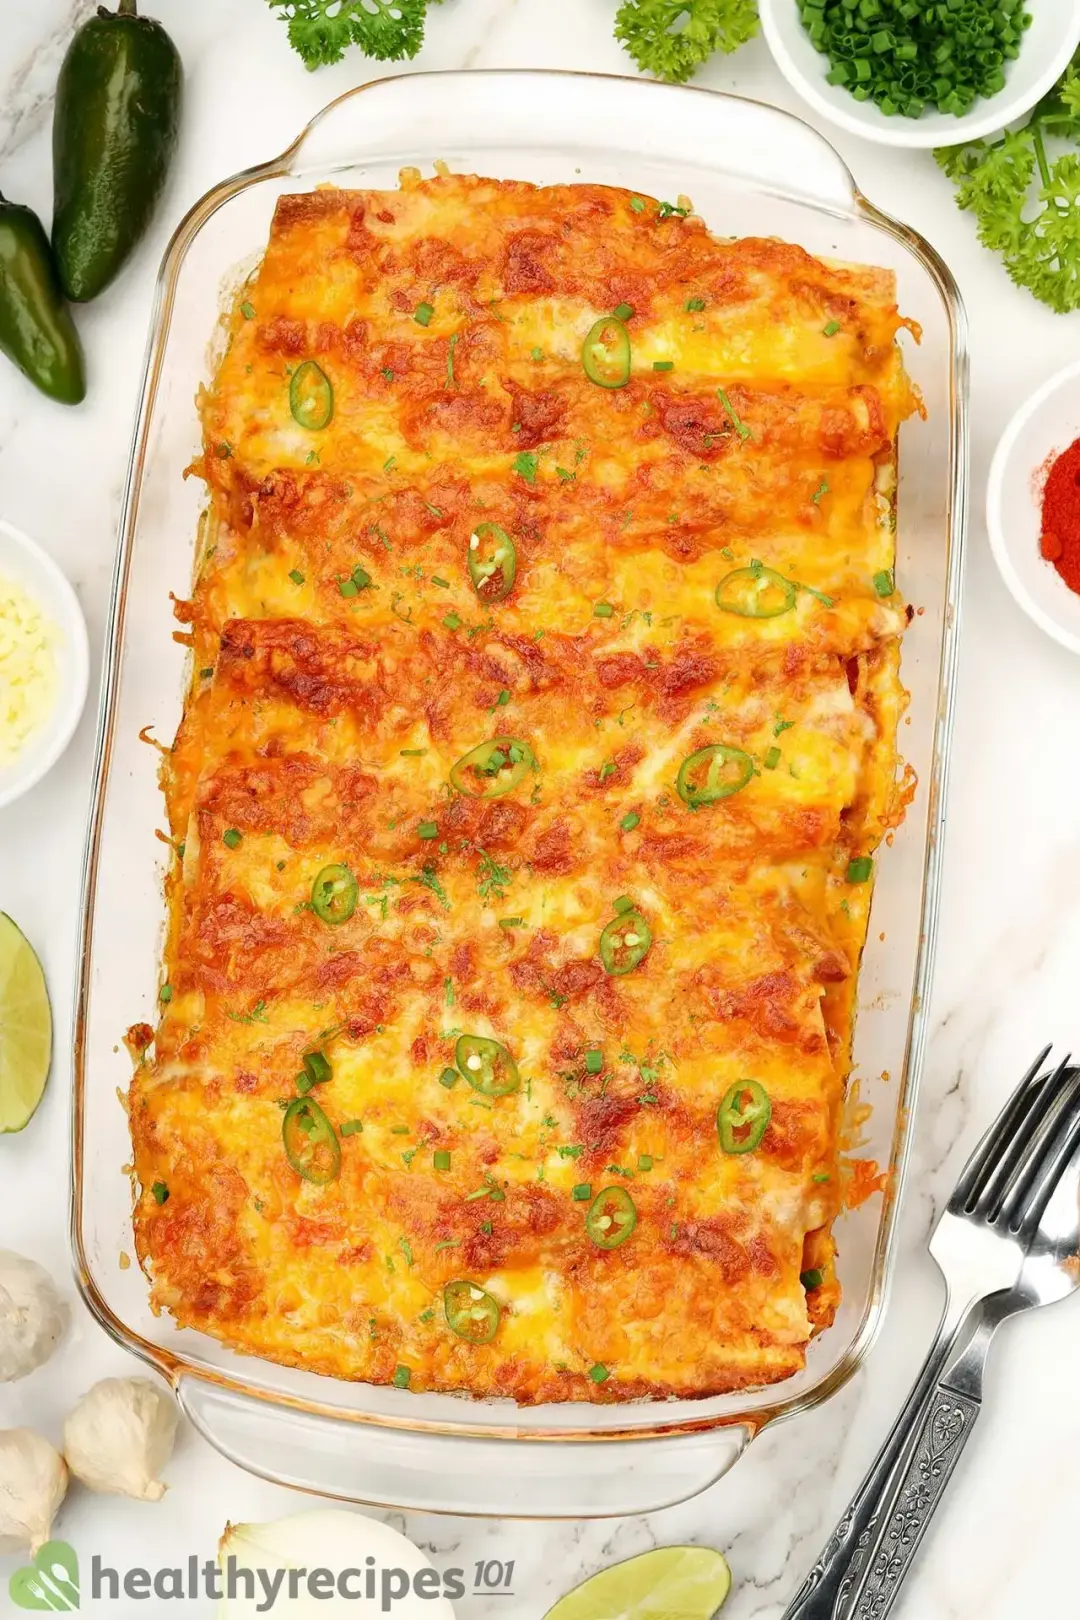 How to Store and Reheat Chicken Enchiladas